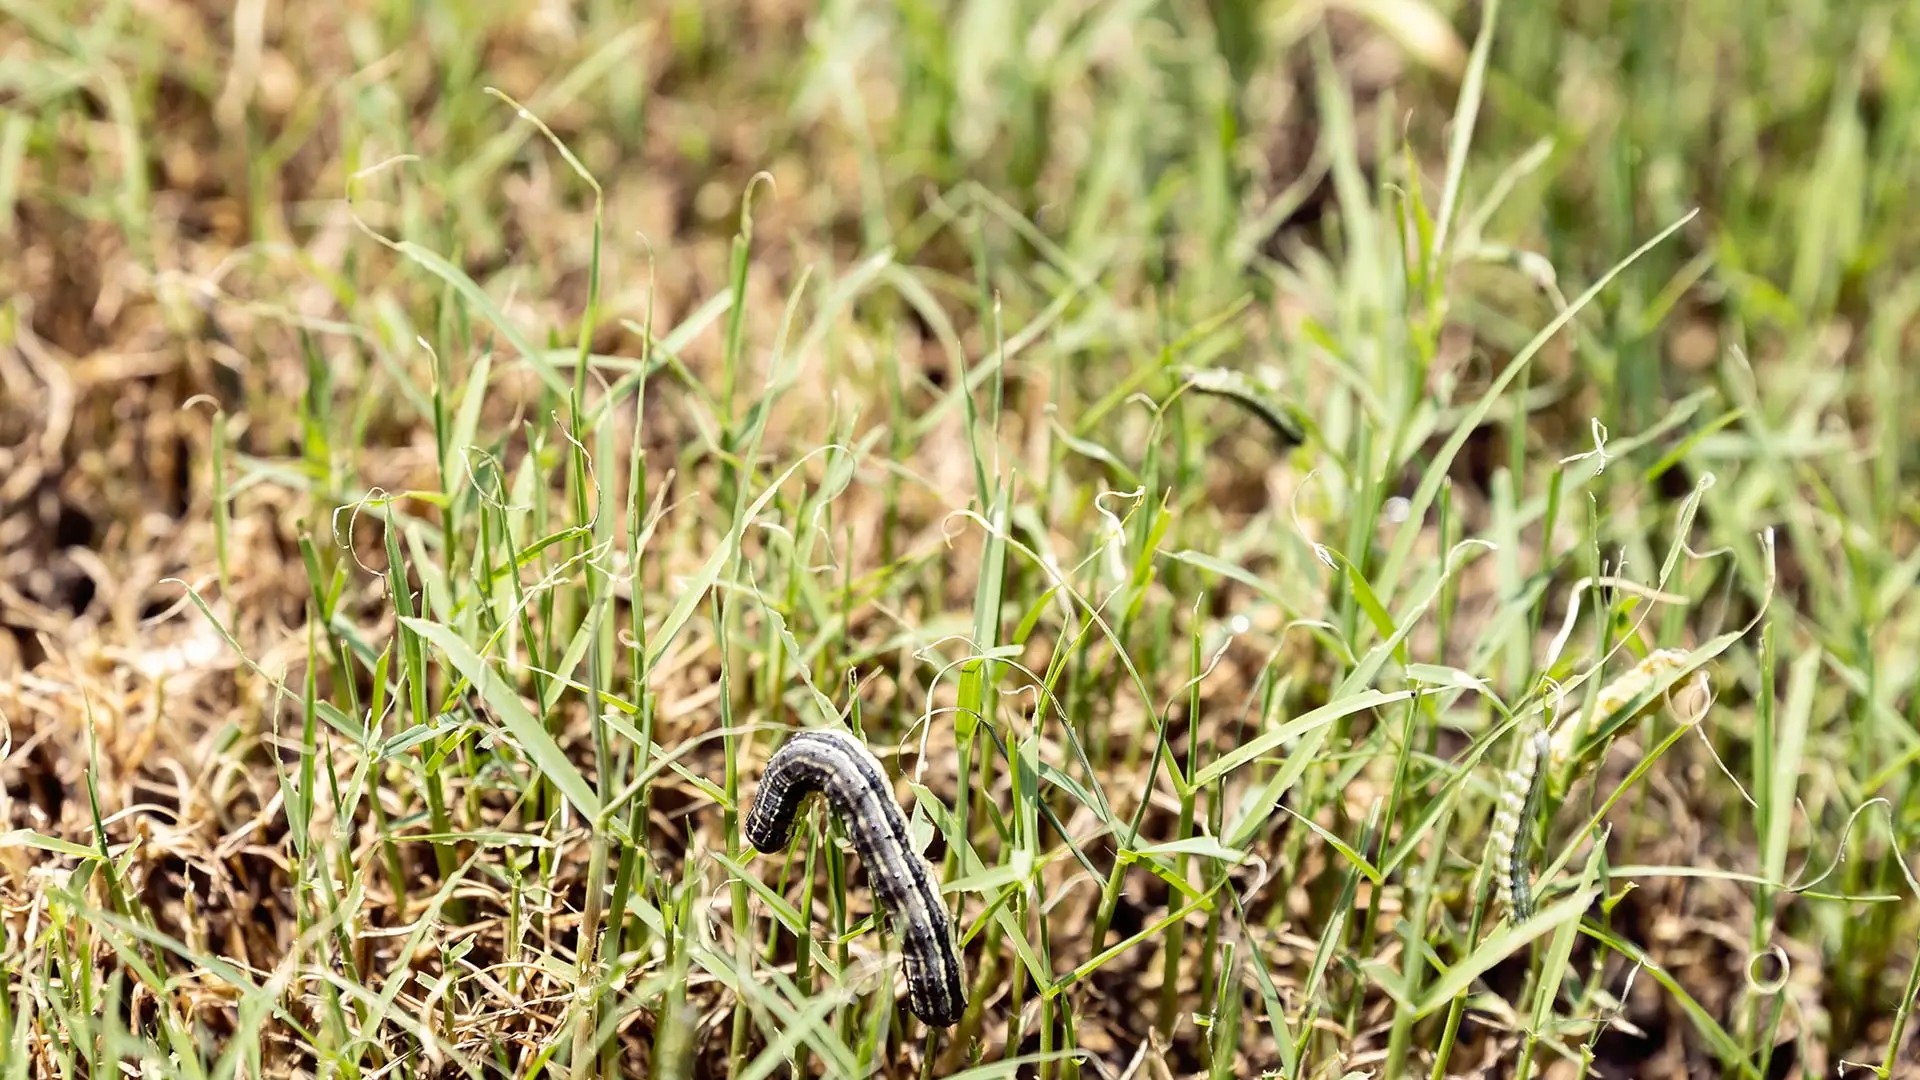 Armyworm found in drying lawn in Parker, TX.